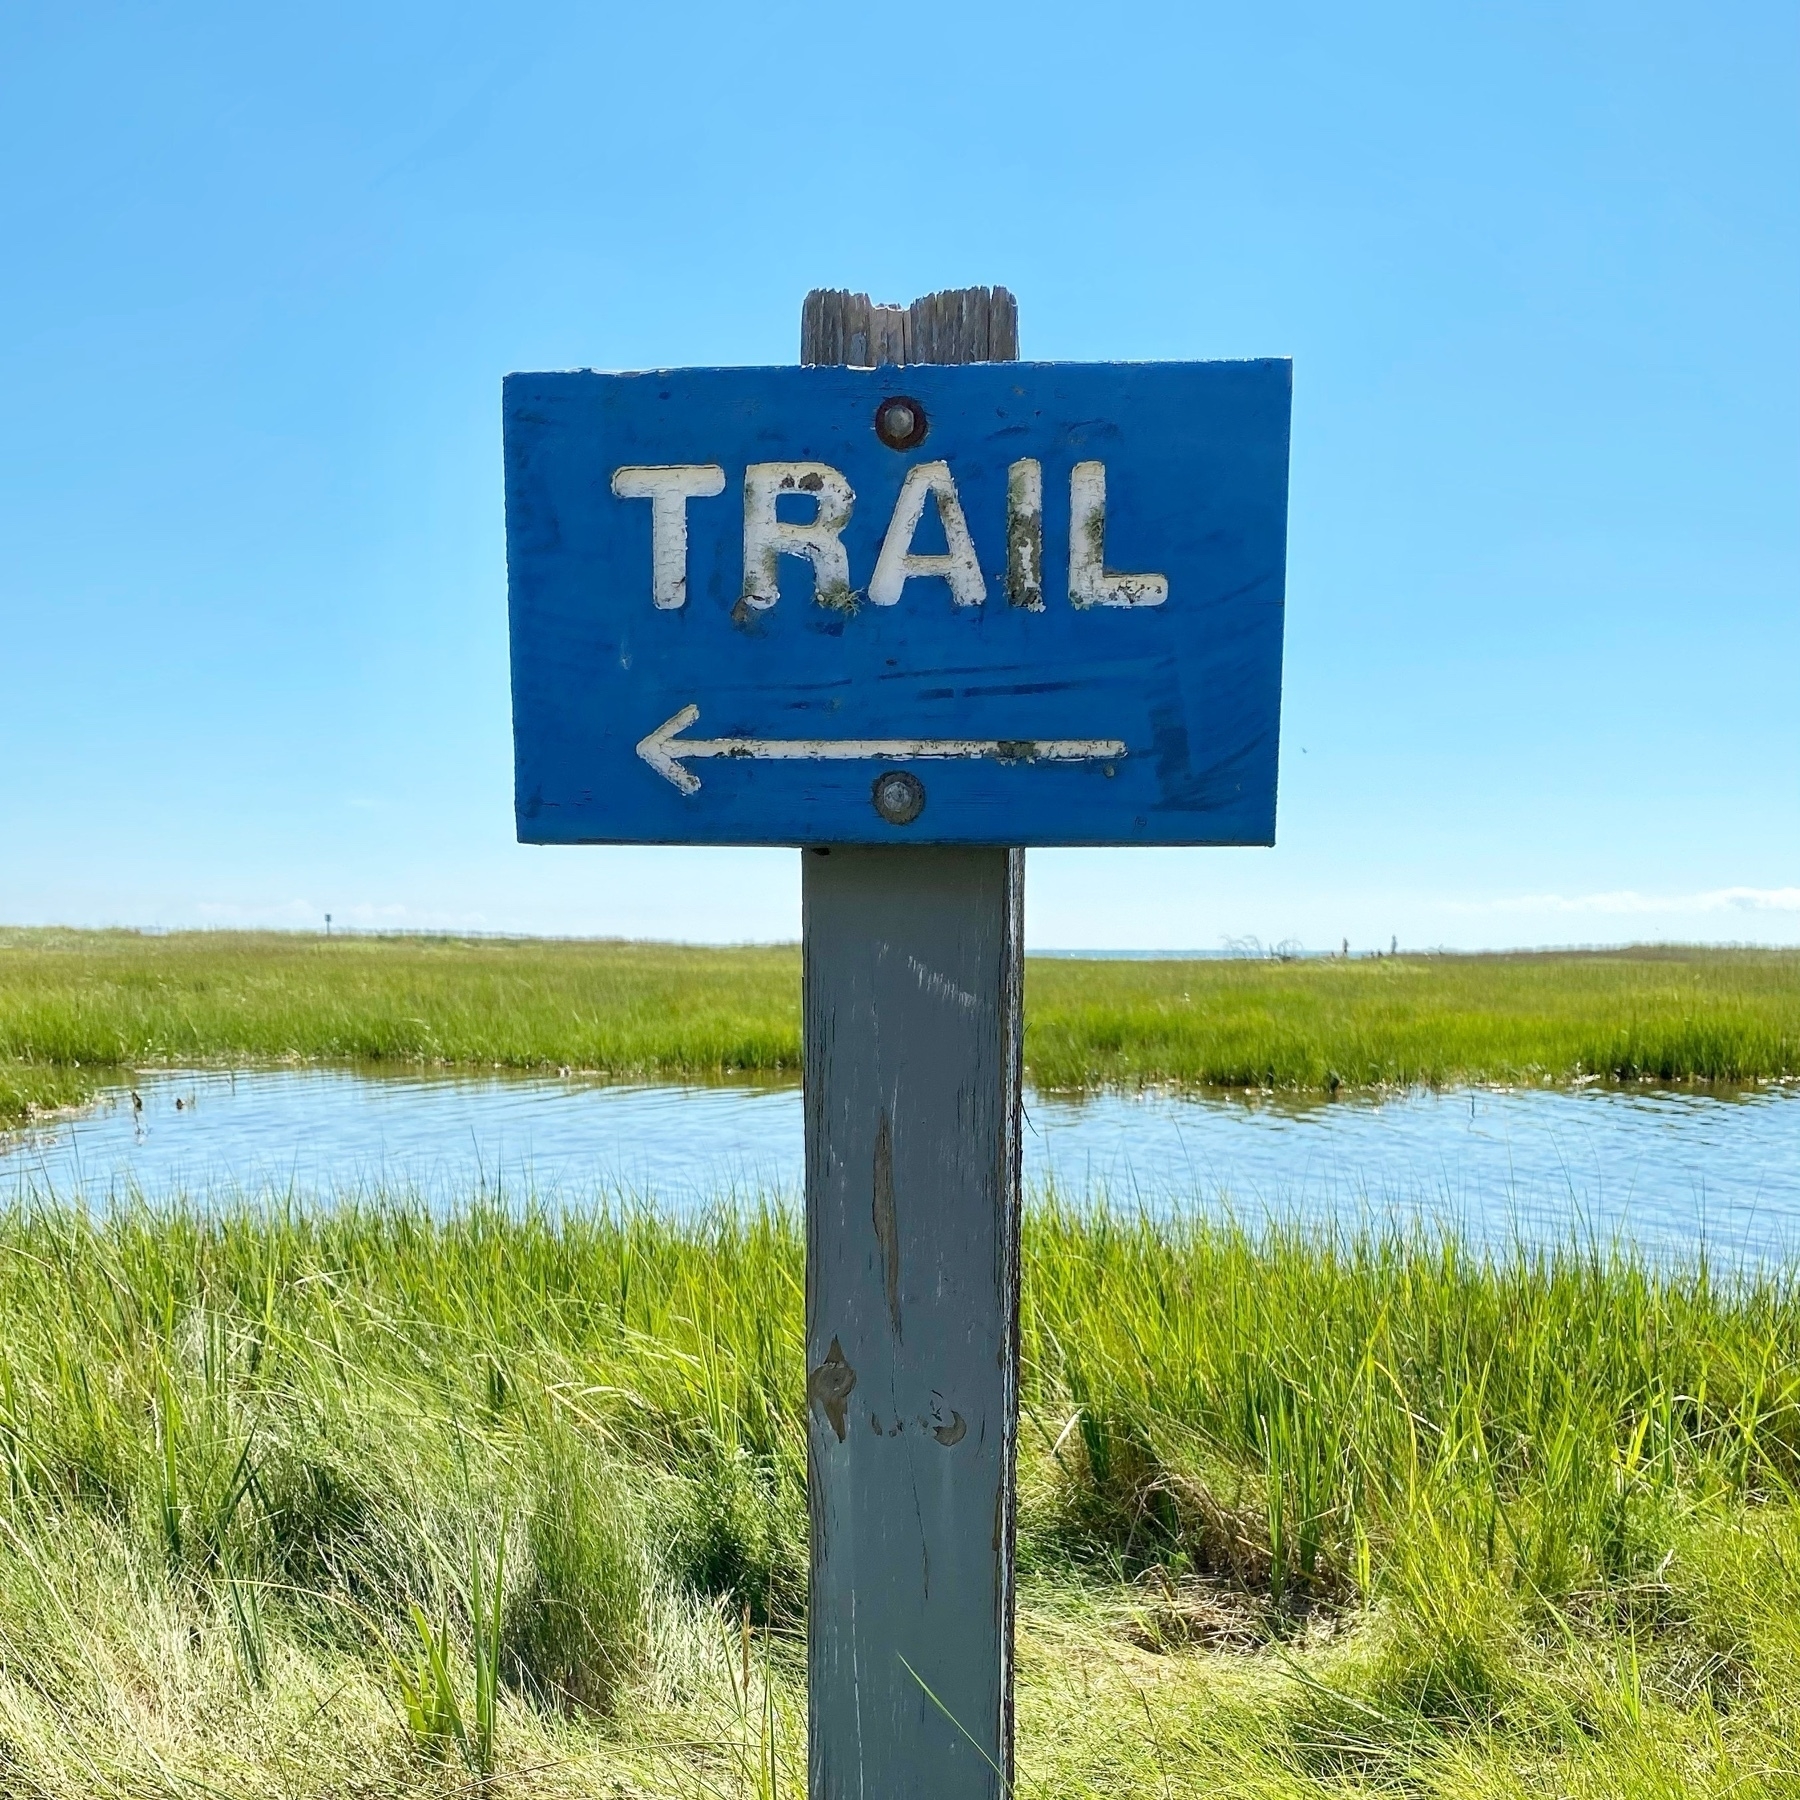 blue sign with white text "trail" against a backdrop of blue sky and beach marsh